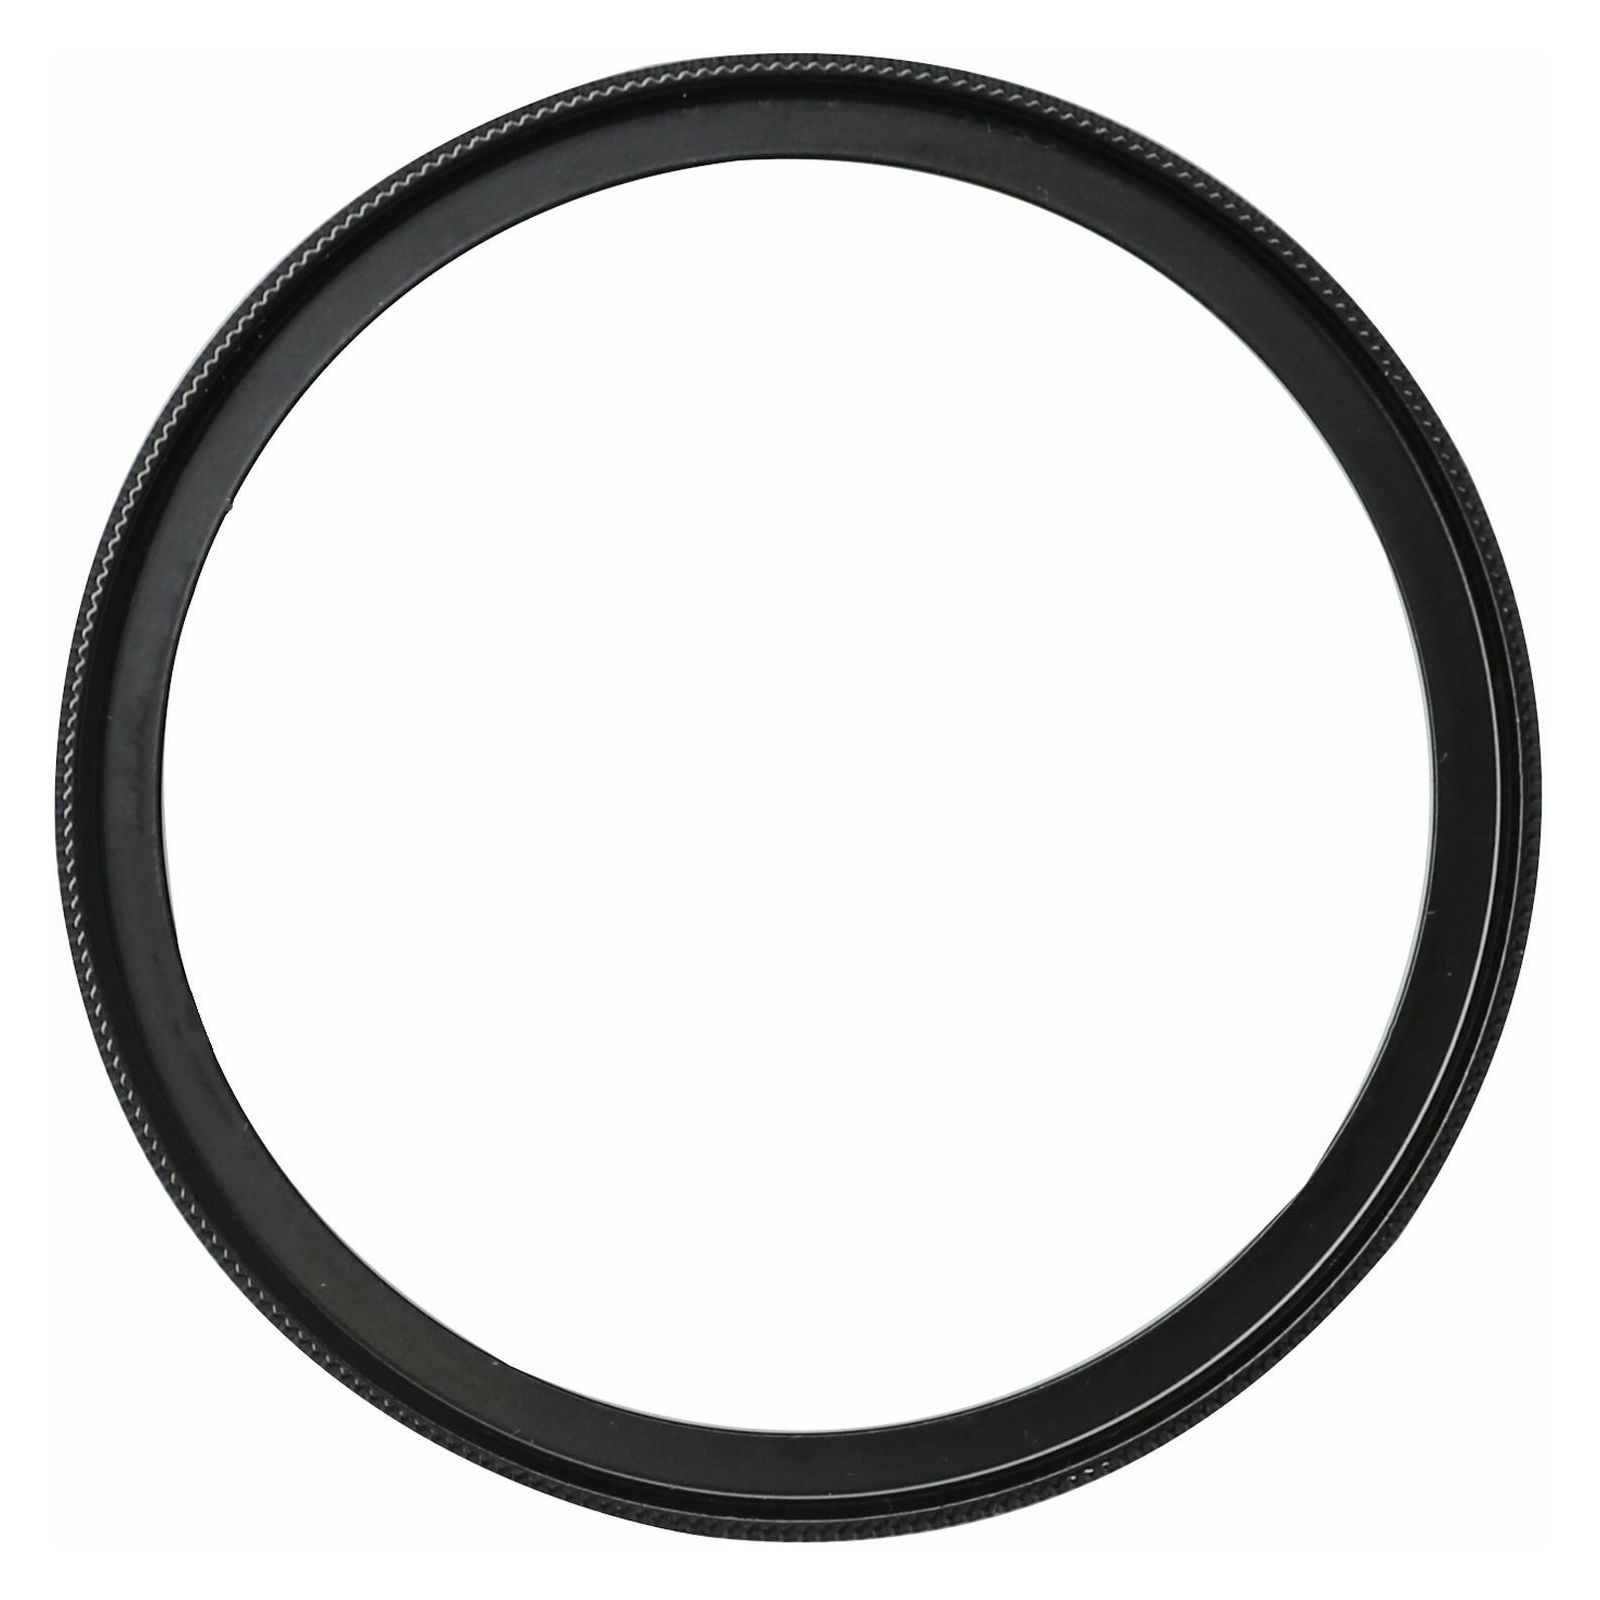 DJI Zenmuse X5S Spare Part 06 Balancing Ring for Olympus 12mm F/2.0, 17mm F/1.8, 25mm F/1.8 ASPH Prime Lens